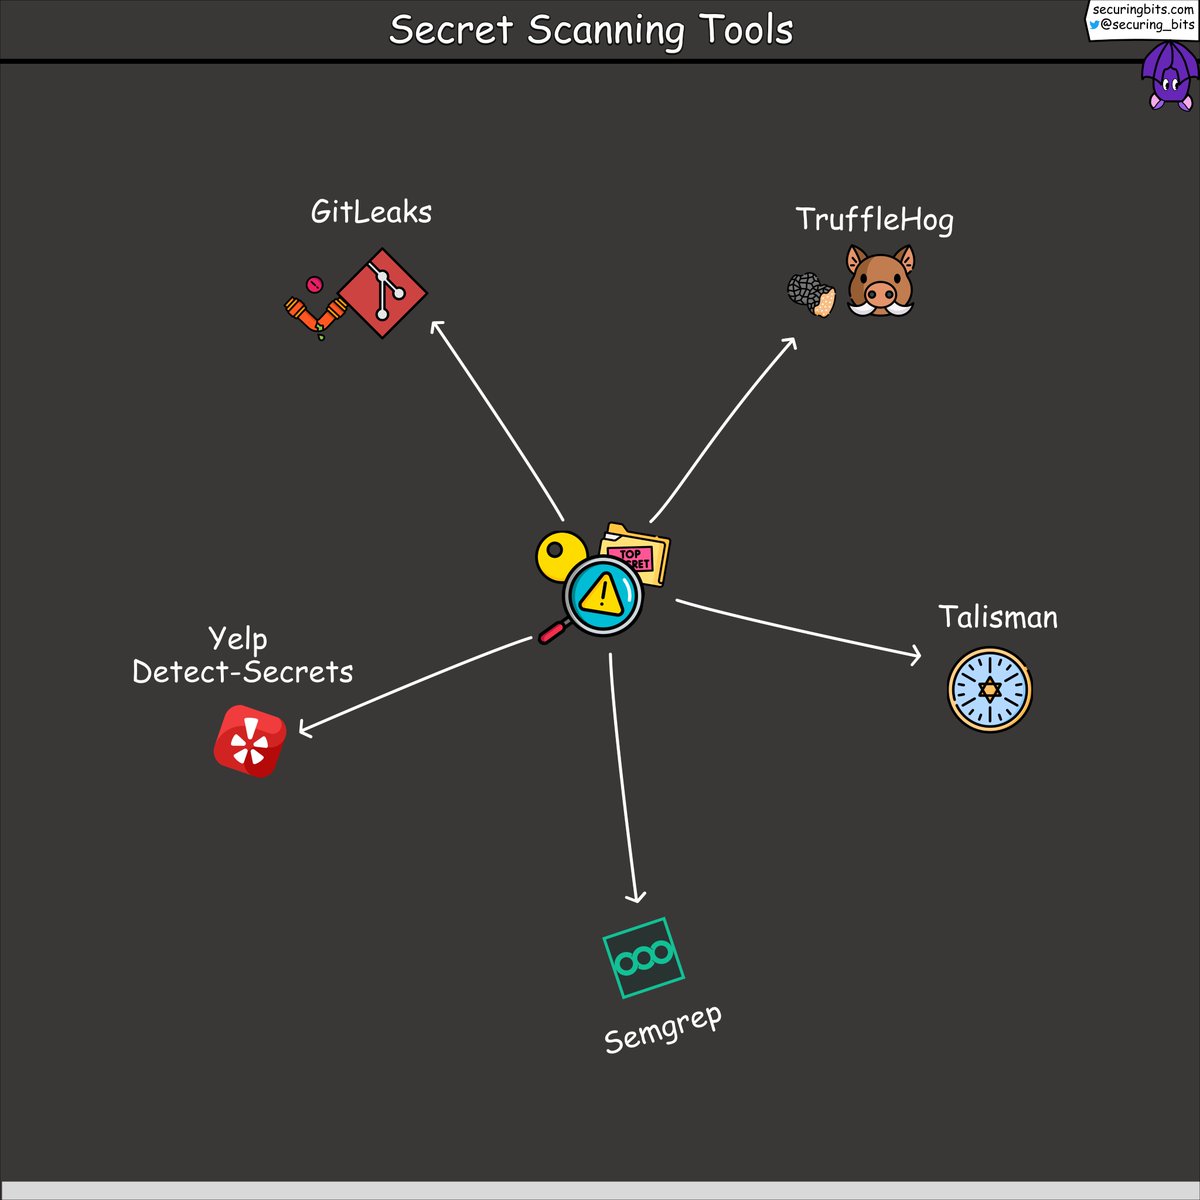 Implement secret scanning in your pipelines  with the following 5 open-source tools:

- Trufflehog github.com/trufflesecurit…

- GitLeaks github.com/gitleaks/gitle…

- Semgrep github.com/semgrep/semgrep

- Talisman github.com/thoughtworks/t…

- Yelp Detect-Secrets github.com/Yelp/detect-se…